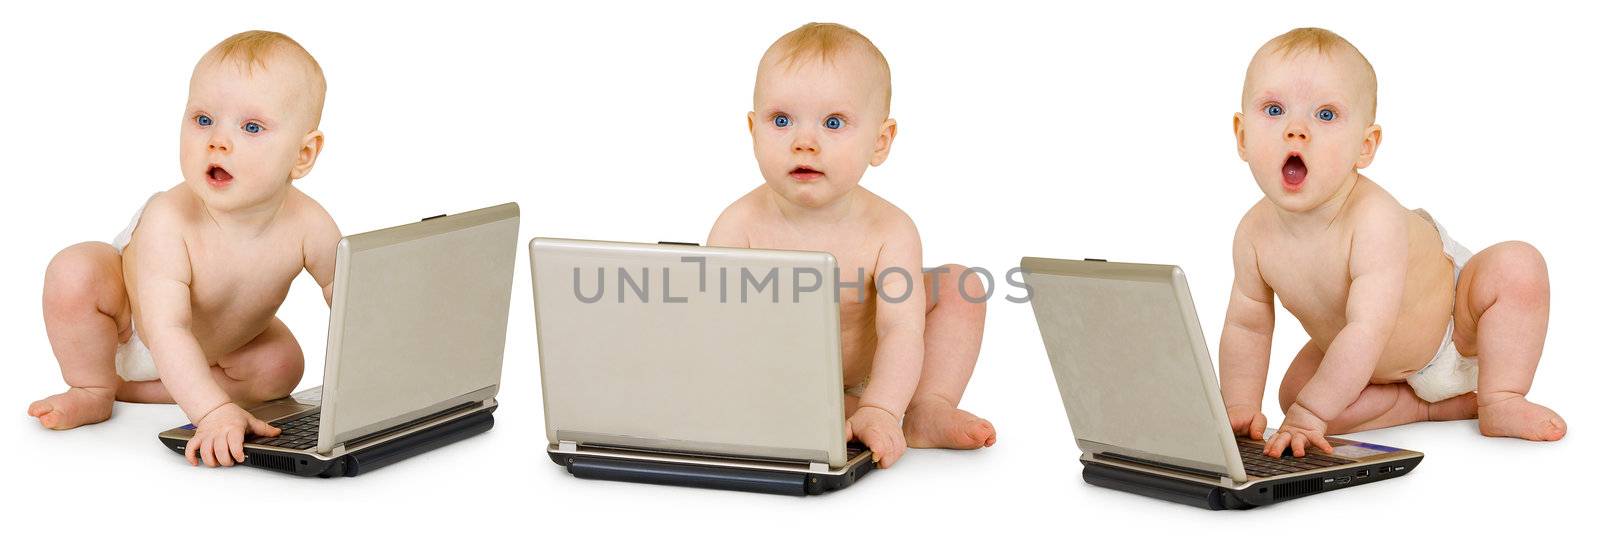 Three baby in diapers with laptops on a white background - collage